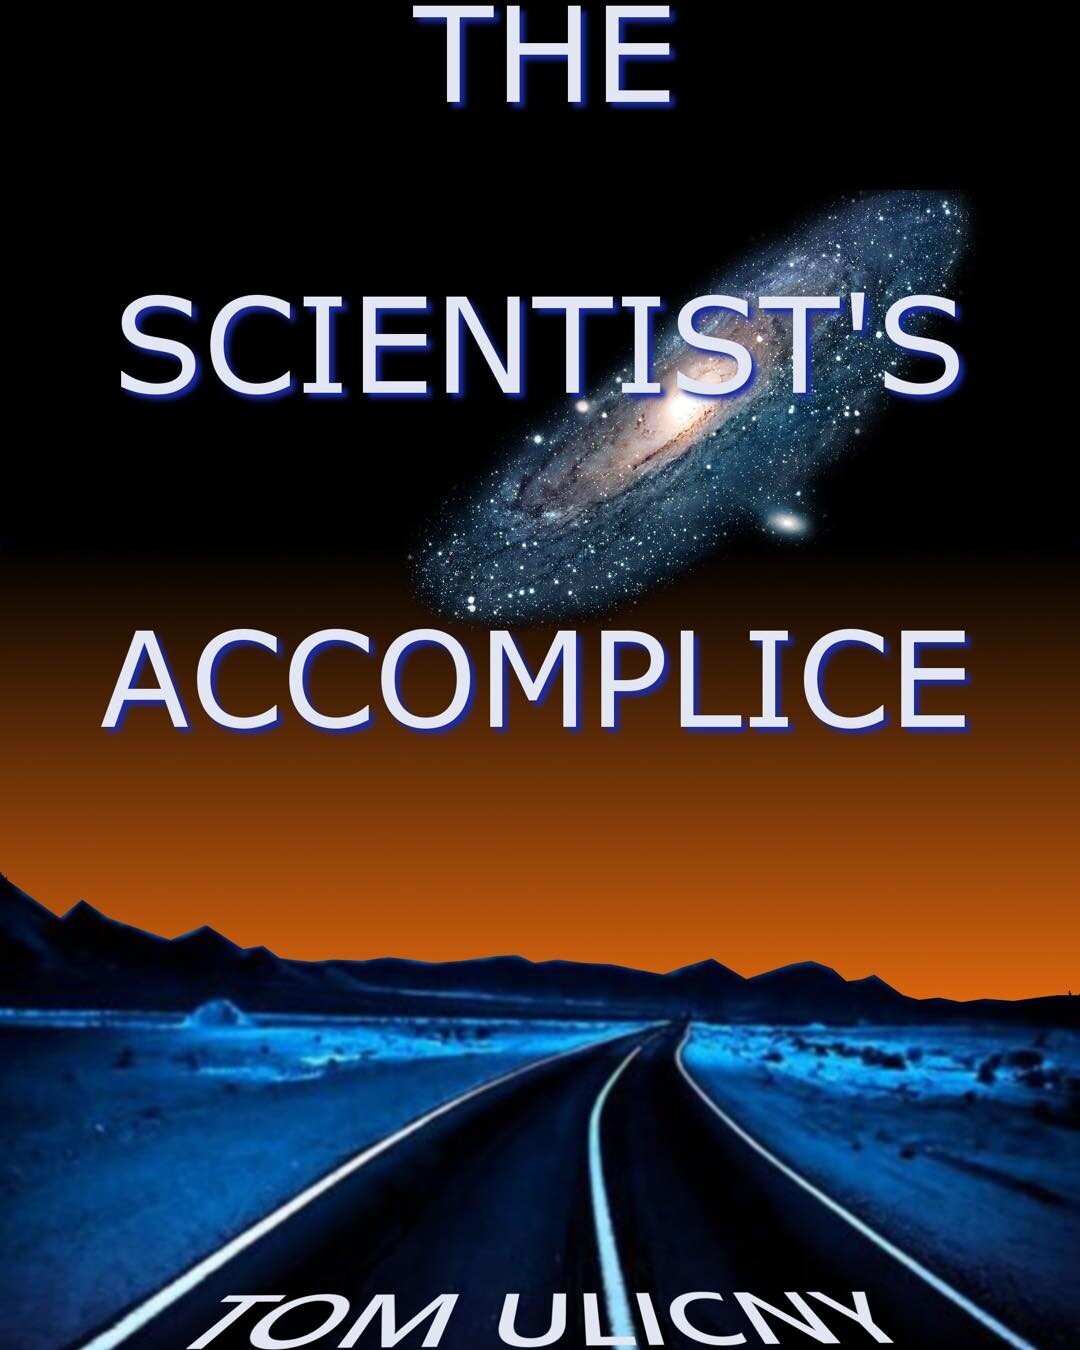 The Scientist's Accomplice. Last day to get your free e-copy https://tinyurl.com/ztgwbol #bookgiveaways